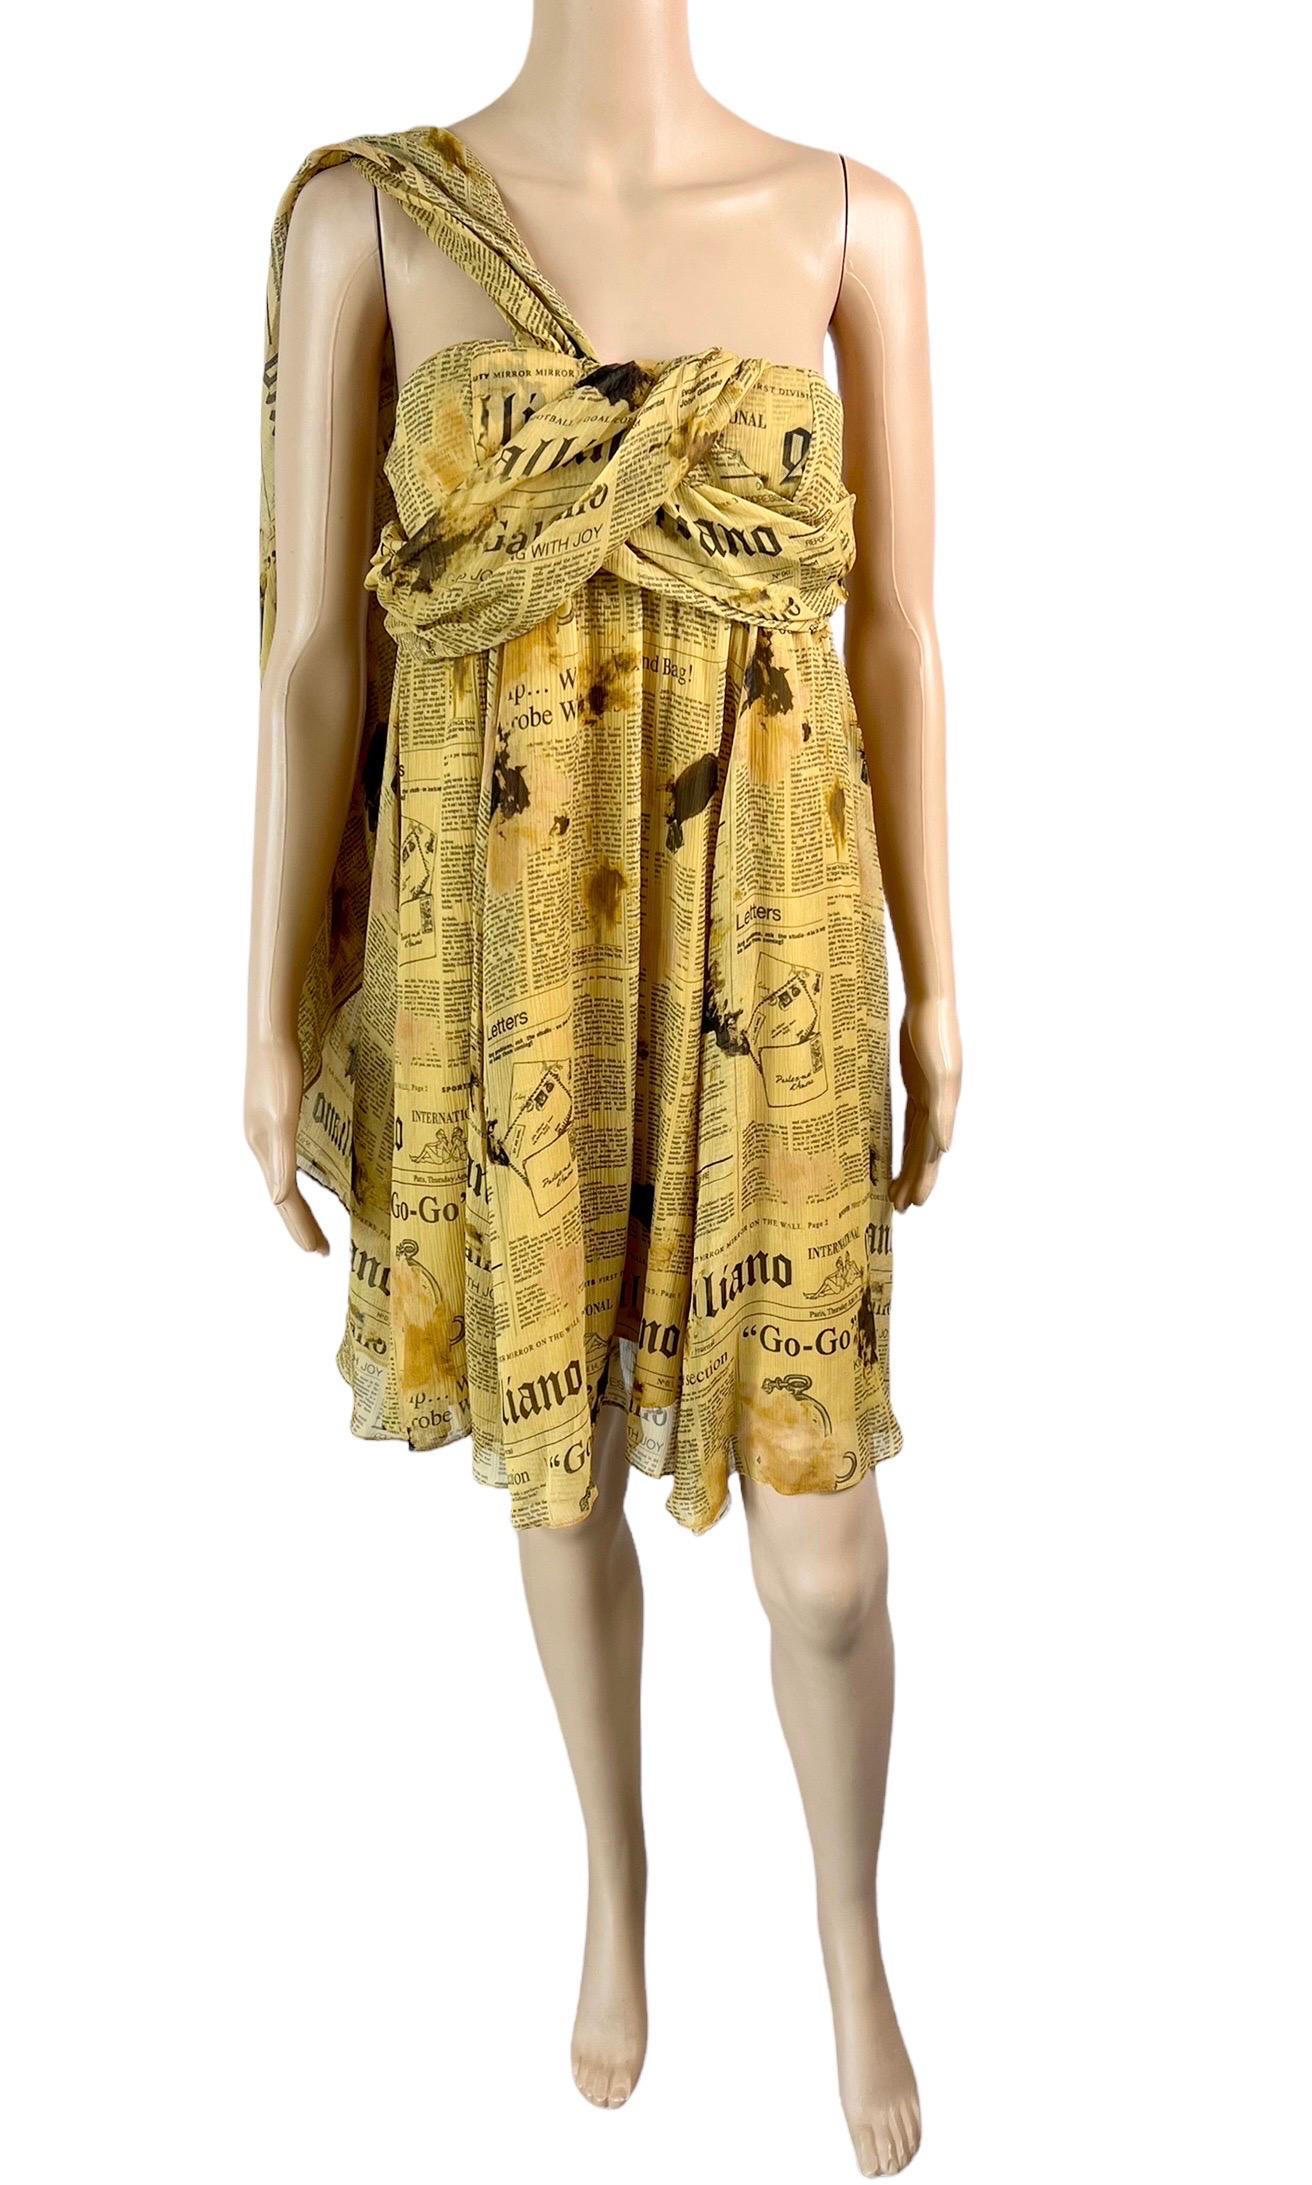 John Galliano 2000's Gazette Newspaper Print Bustier Silk Dress Size S

Please note size tag has been removed.